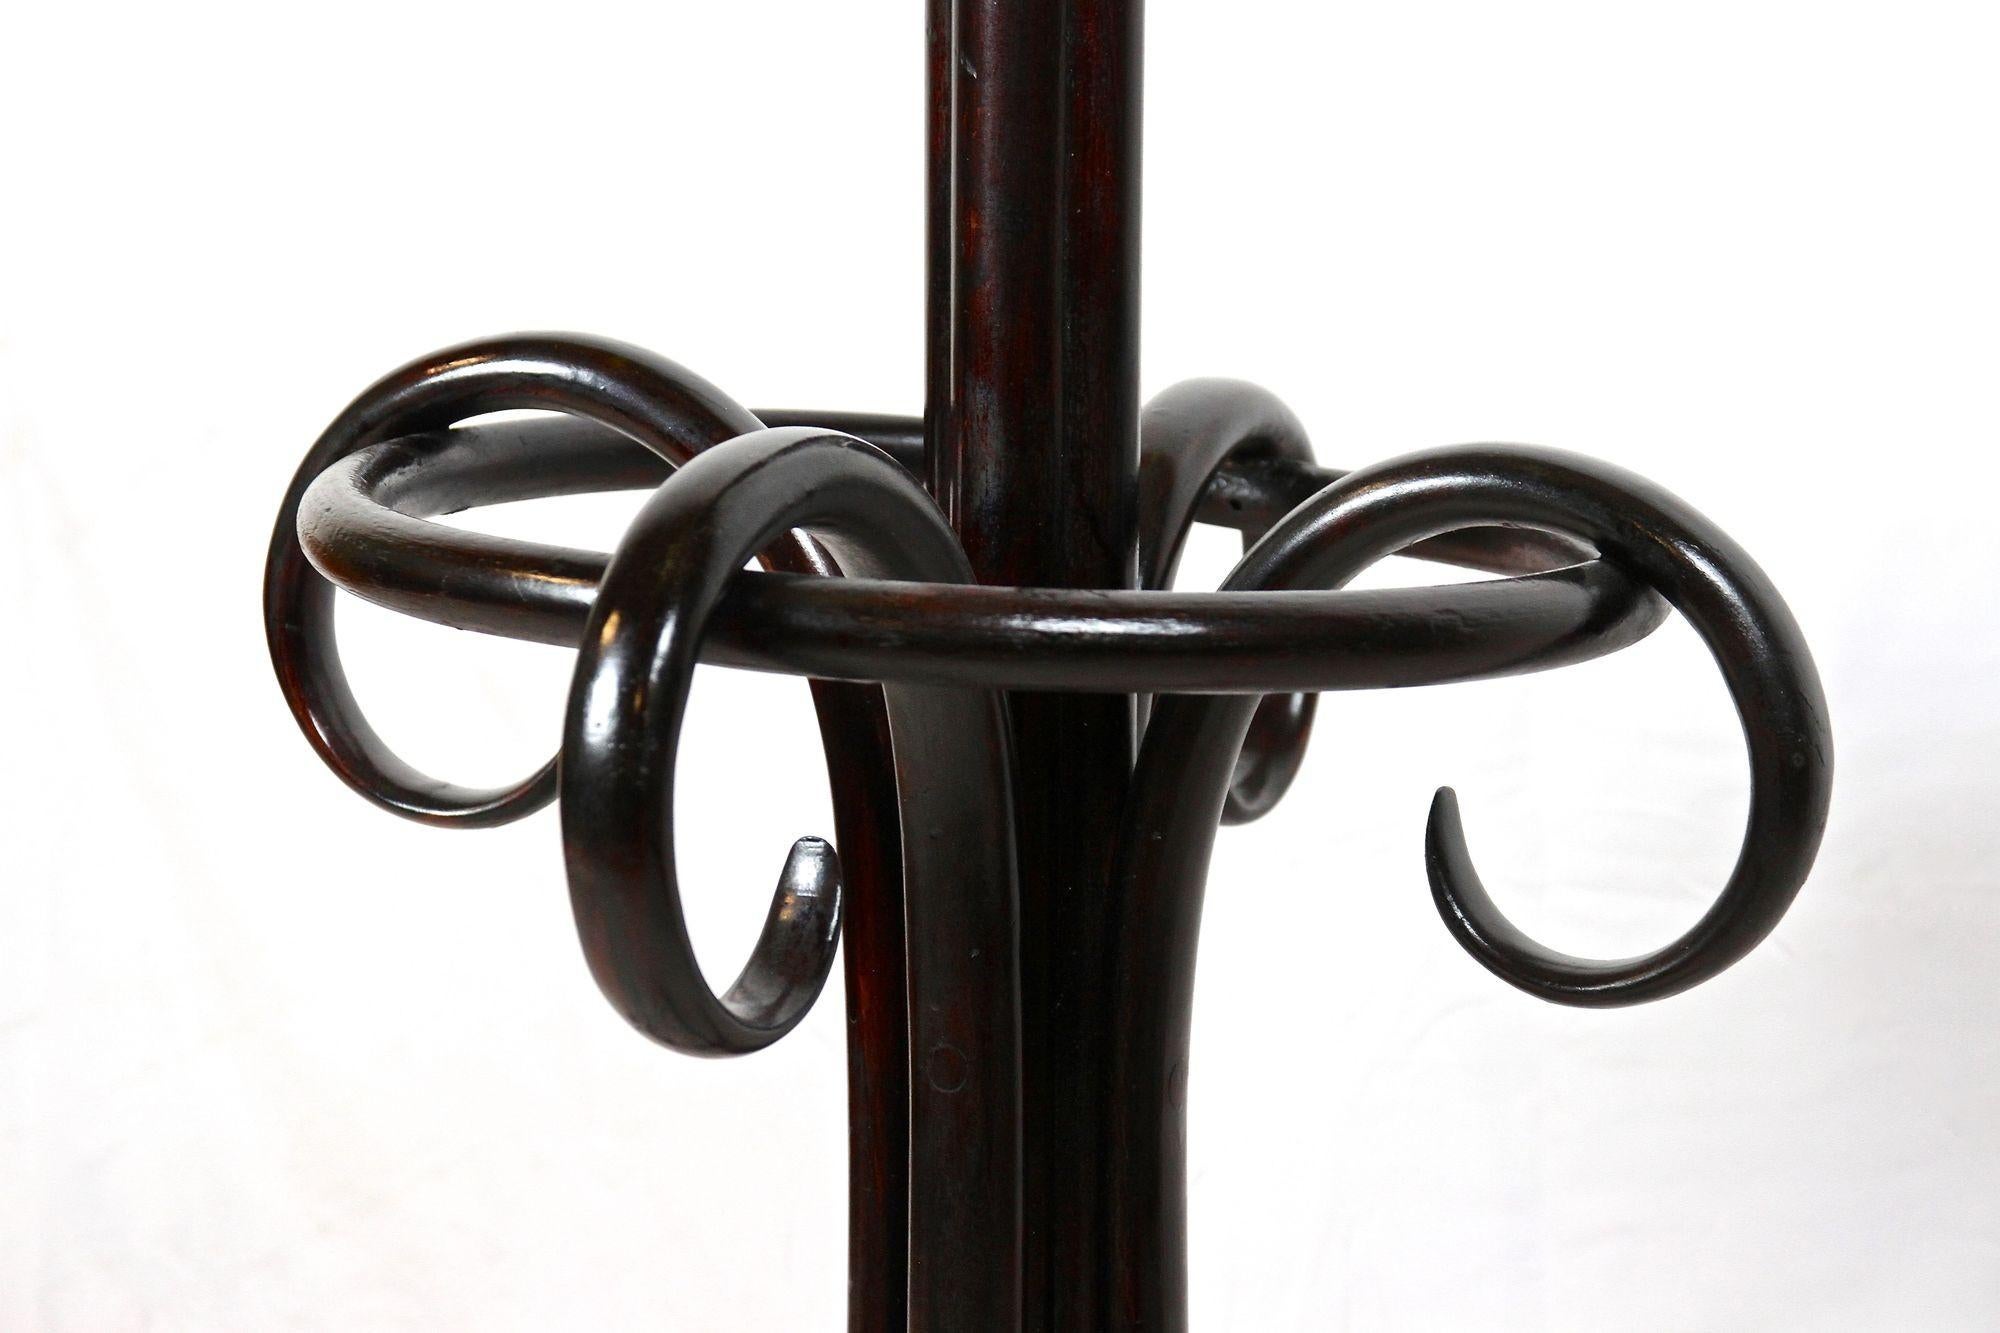 Thonet Coat Rack/ Wardrobe Stand Bentwood Polished, Art Nouveau, AT ca. 1905 For Sale 6